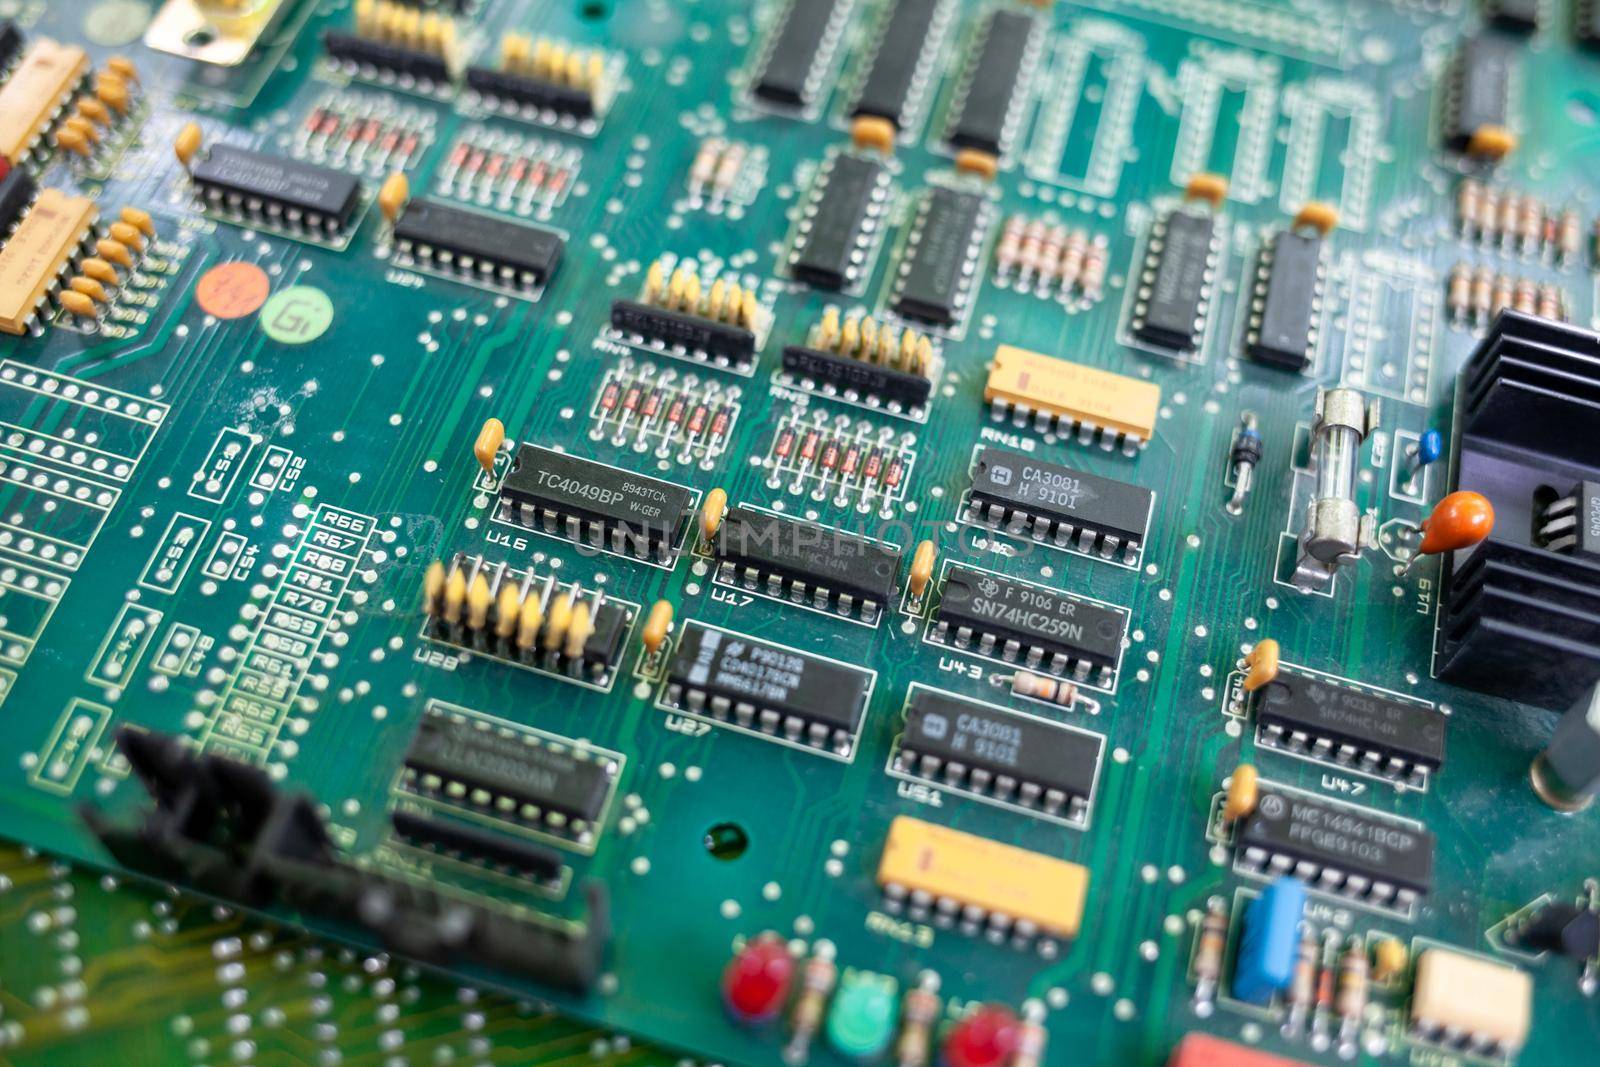 Old computer chips that are out of order. Not working microshops with transistors, chips and conductors. Blue system board with microchips and transistors